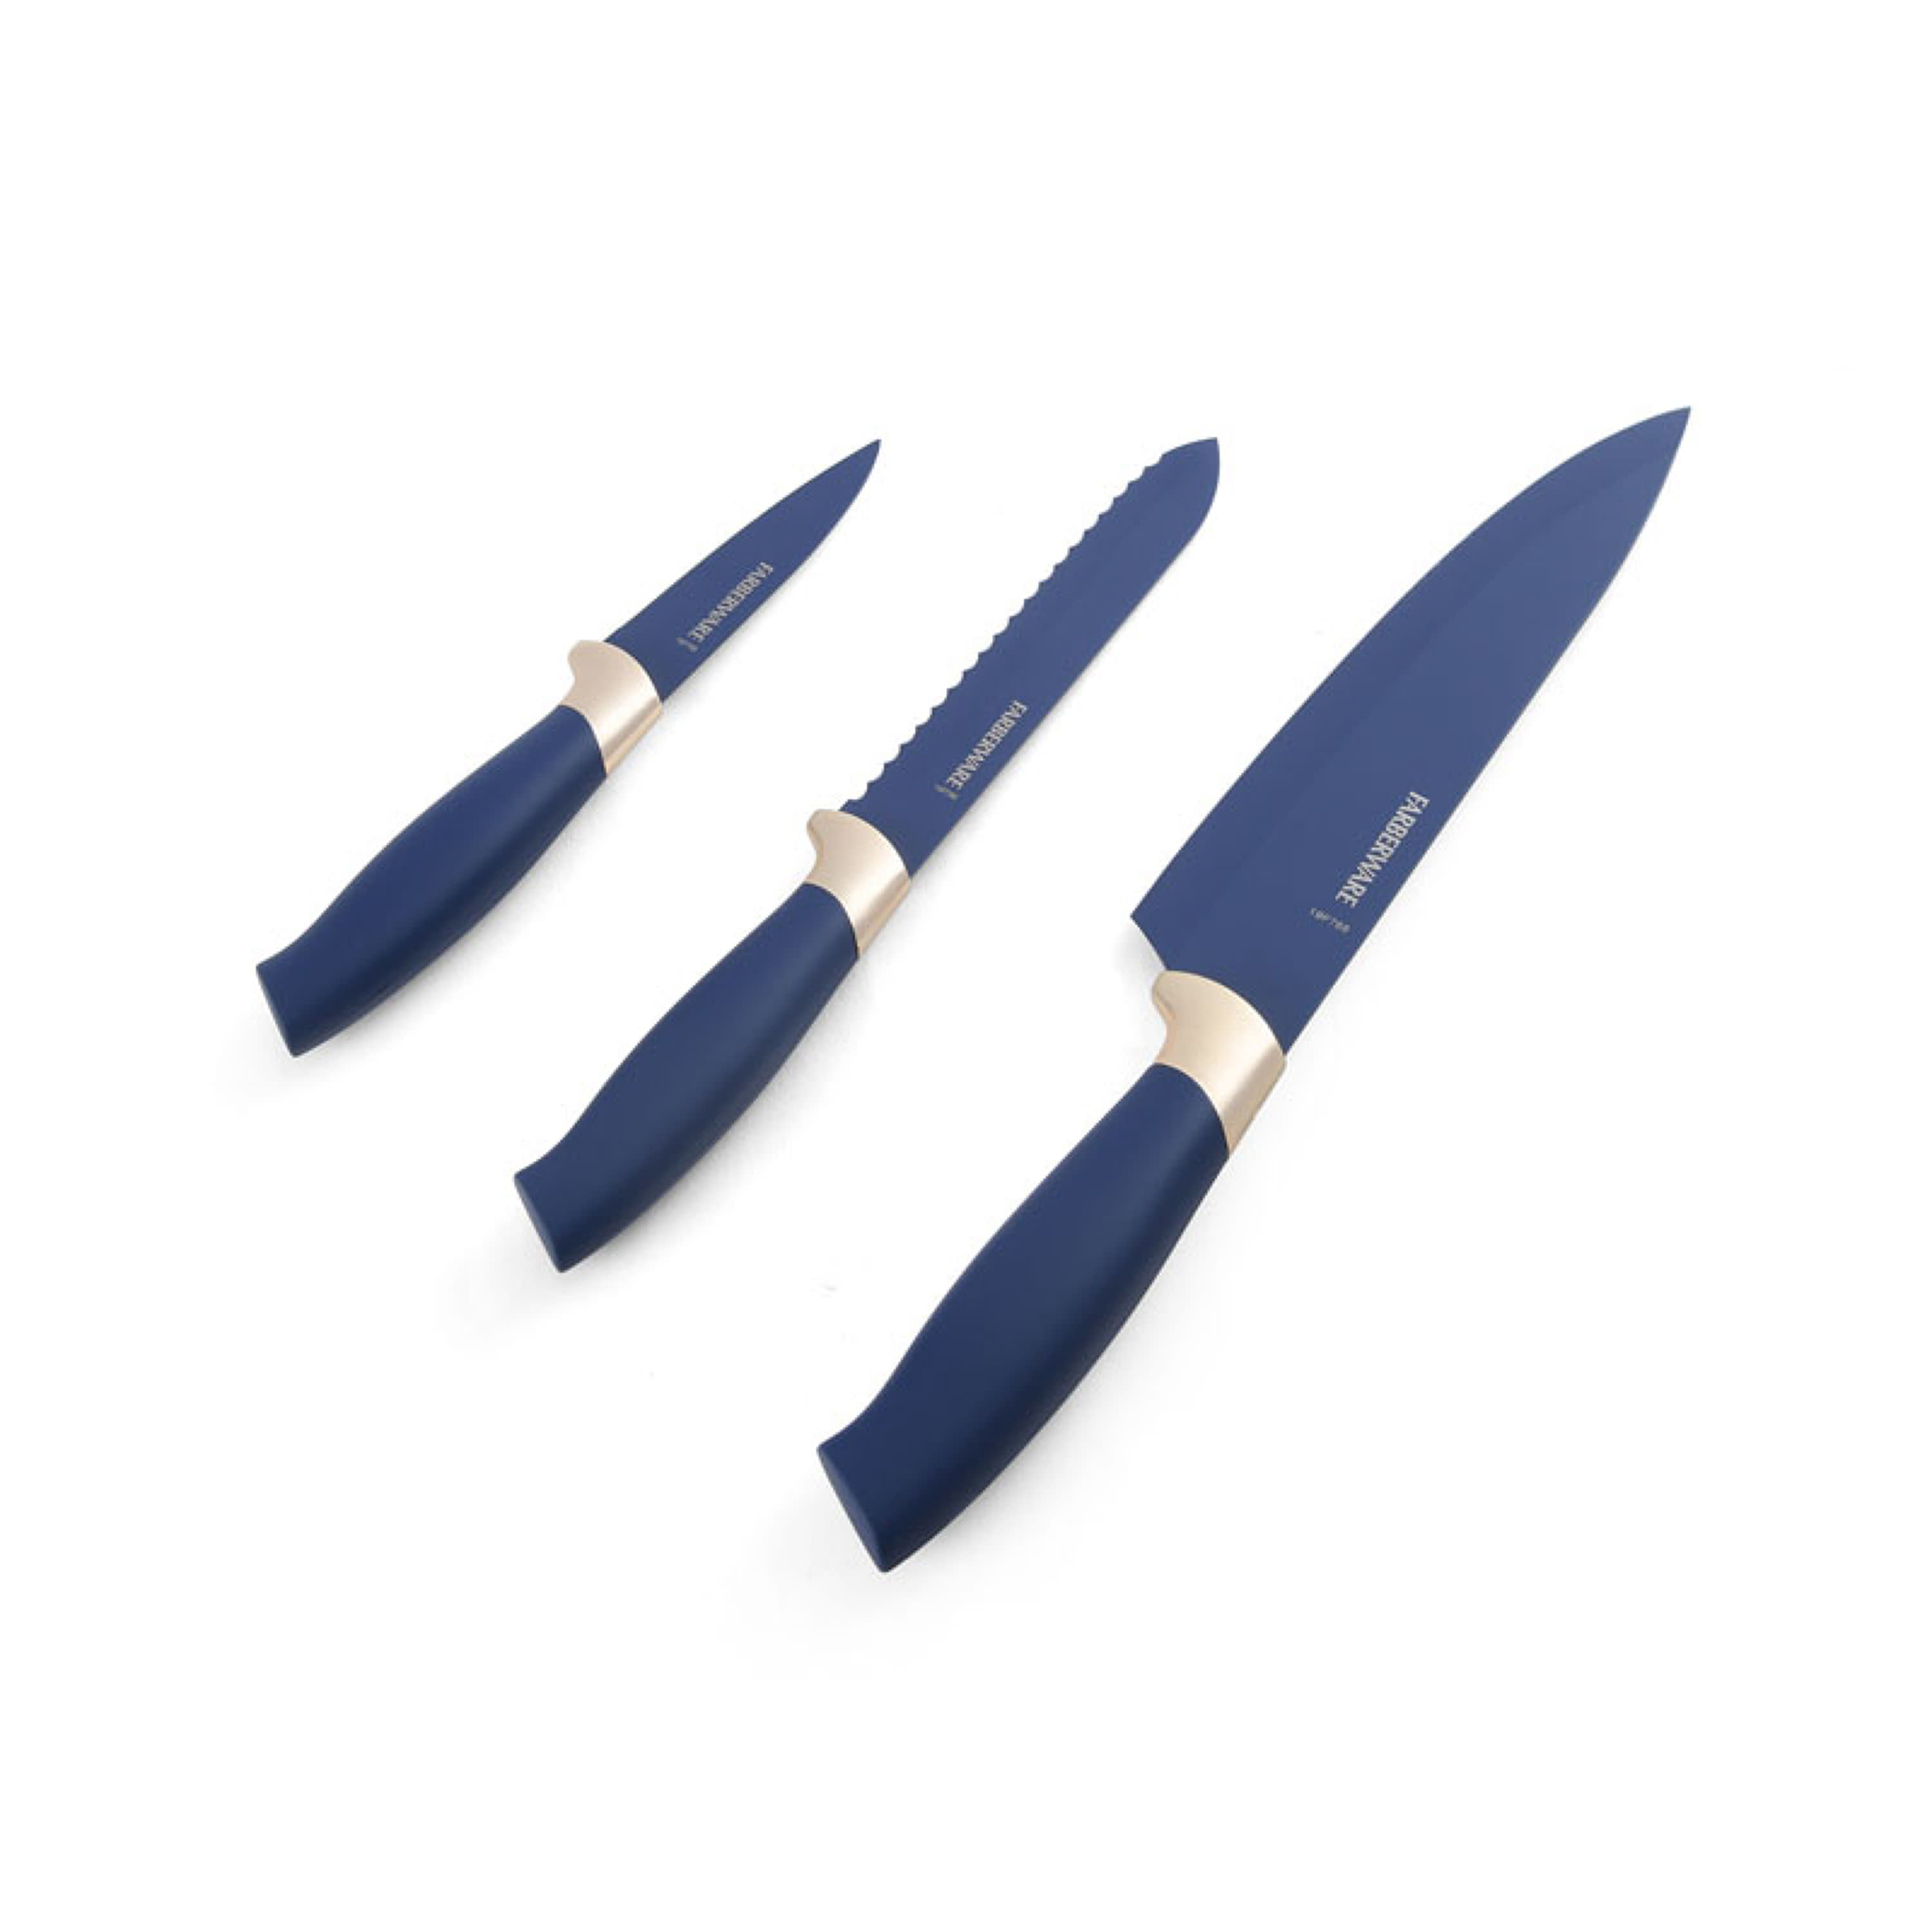 Farberware 3-piece Chef Knife Set, Navy and Gold Soft Grip Handle 